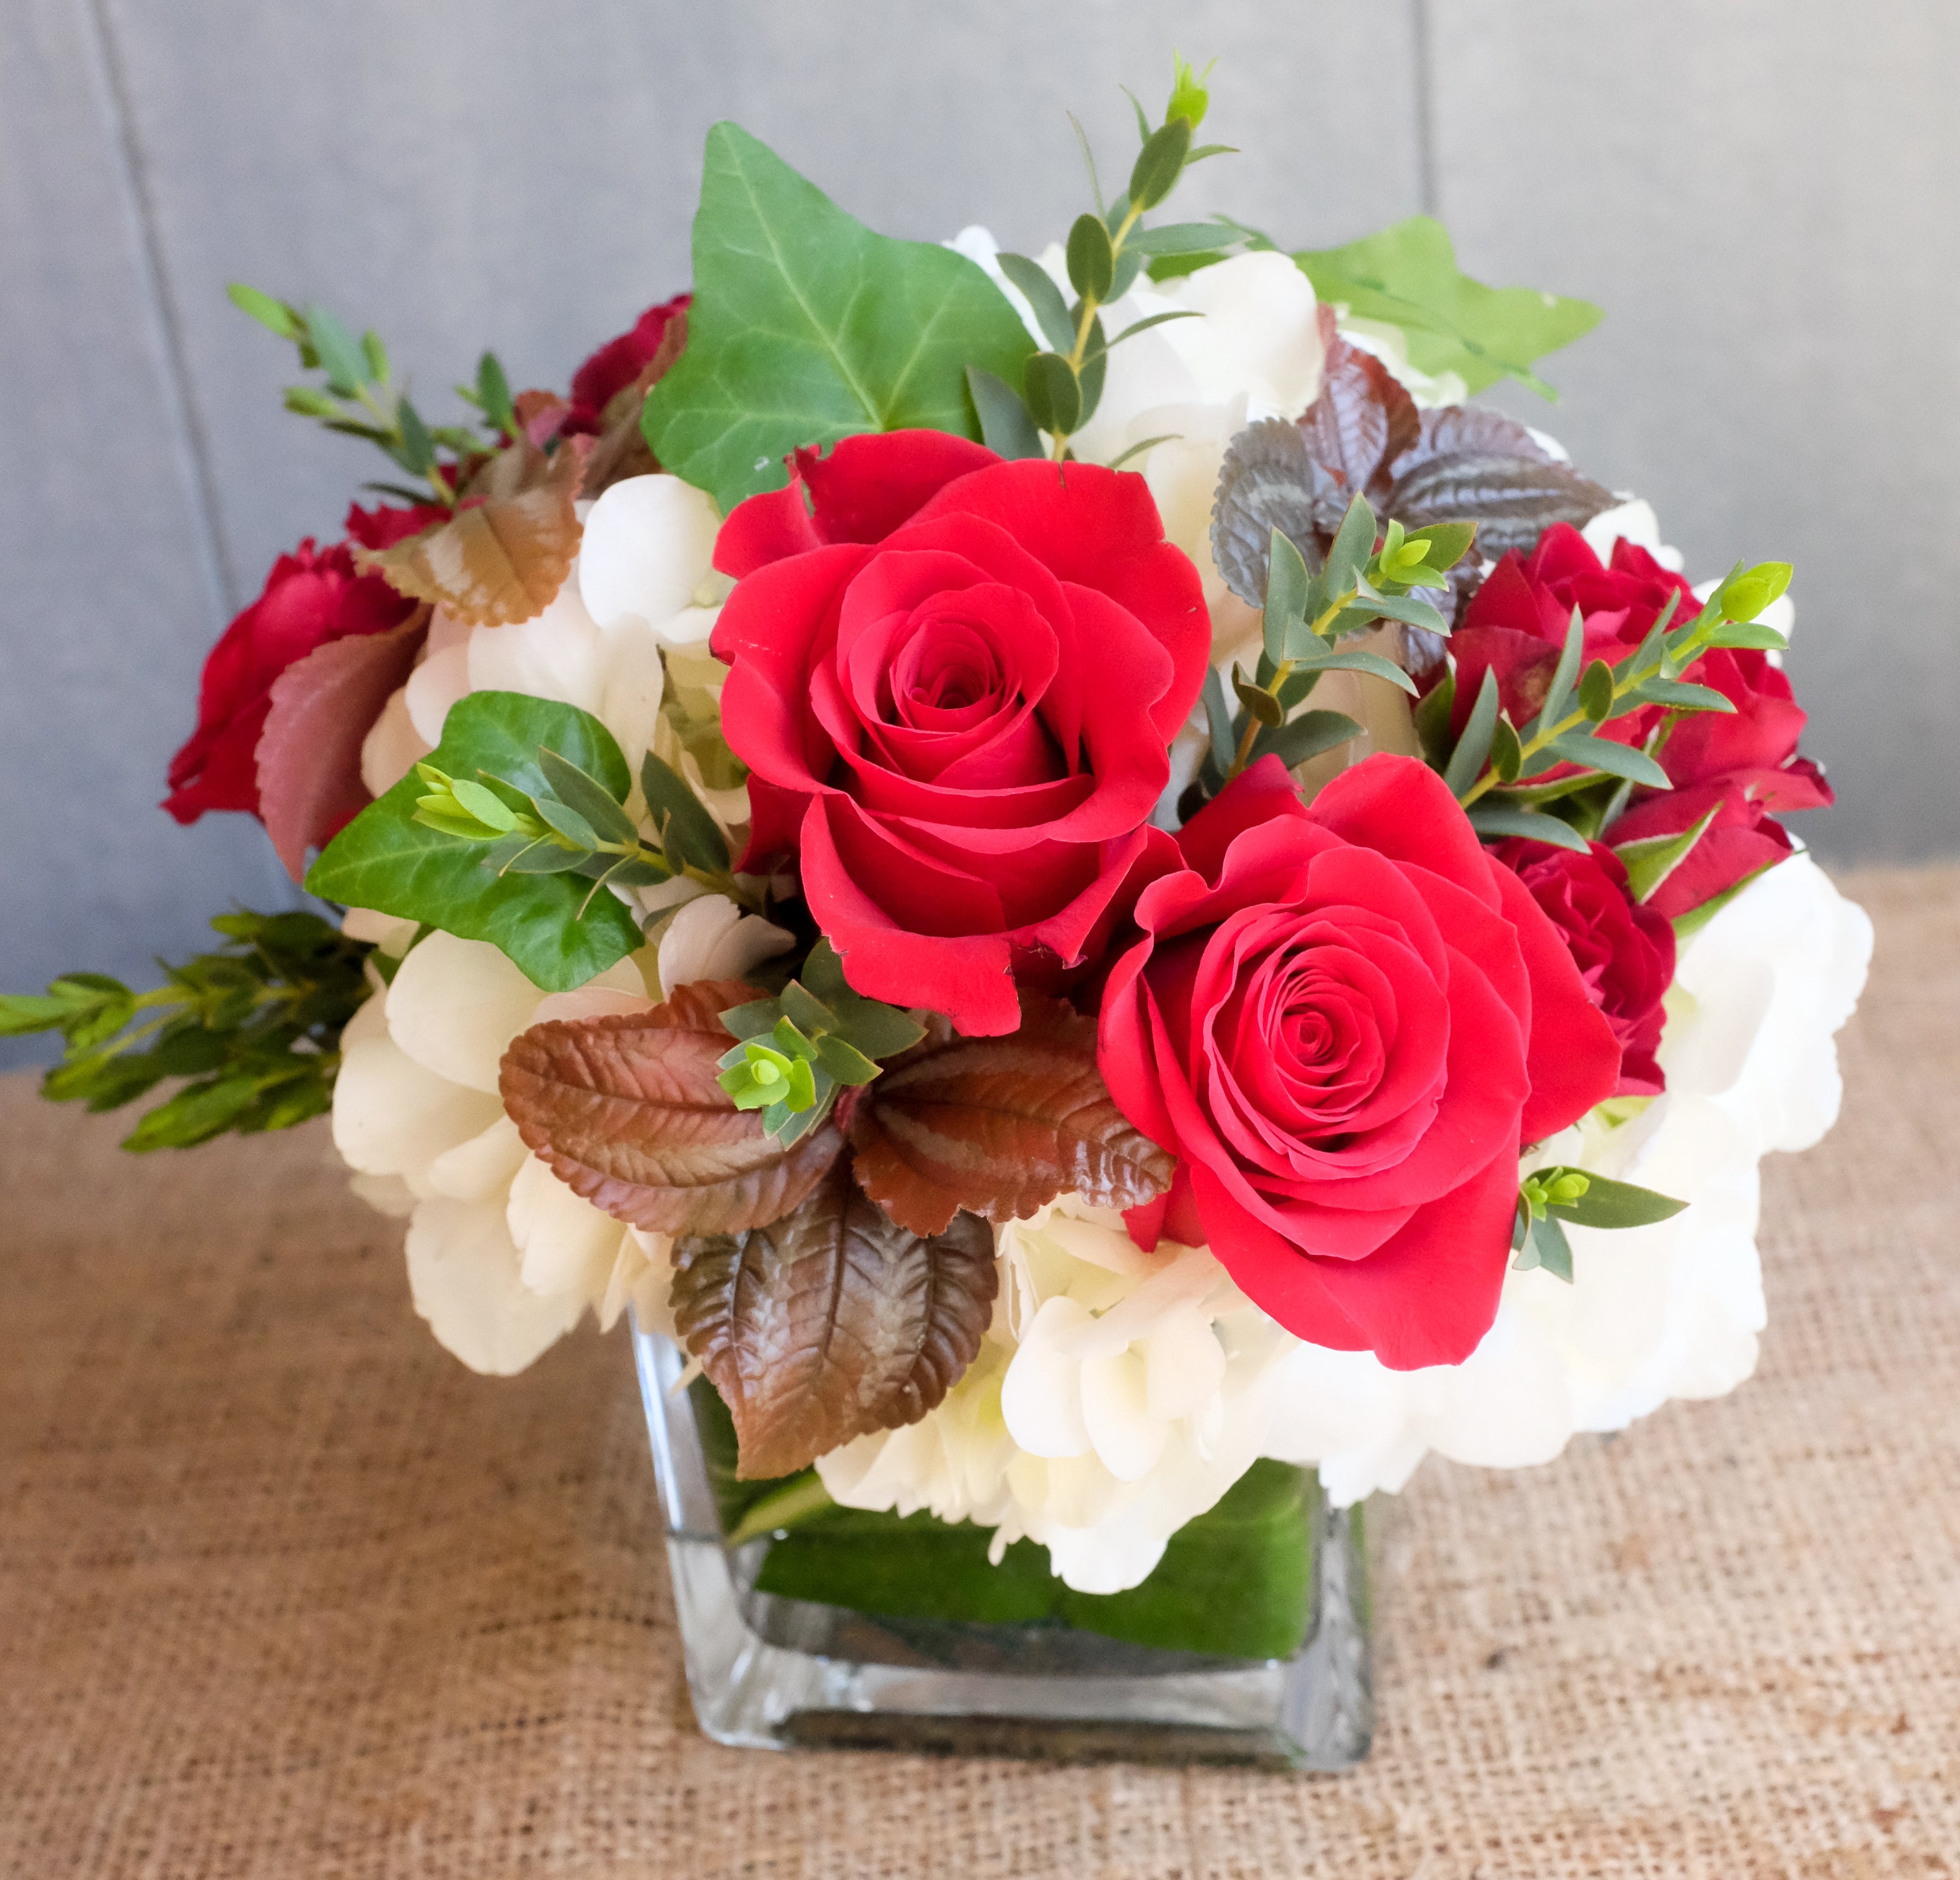 Sherbrooke: Floral design with white hydrangea and red roses, ivy in a square vase.  Designed by Michler's Florist in Lexington, KY